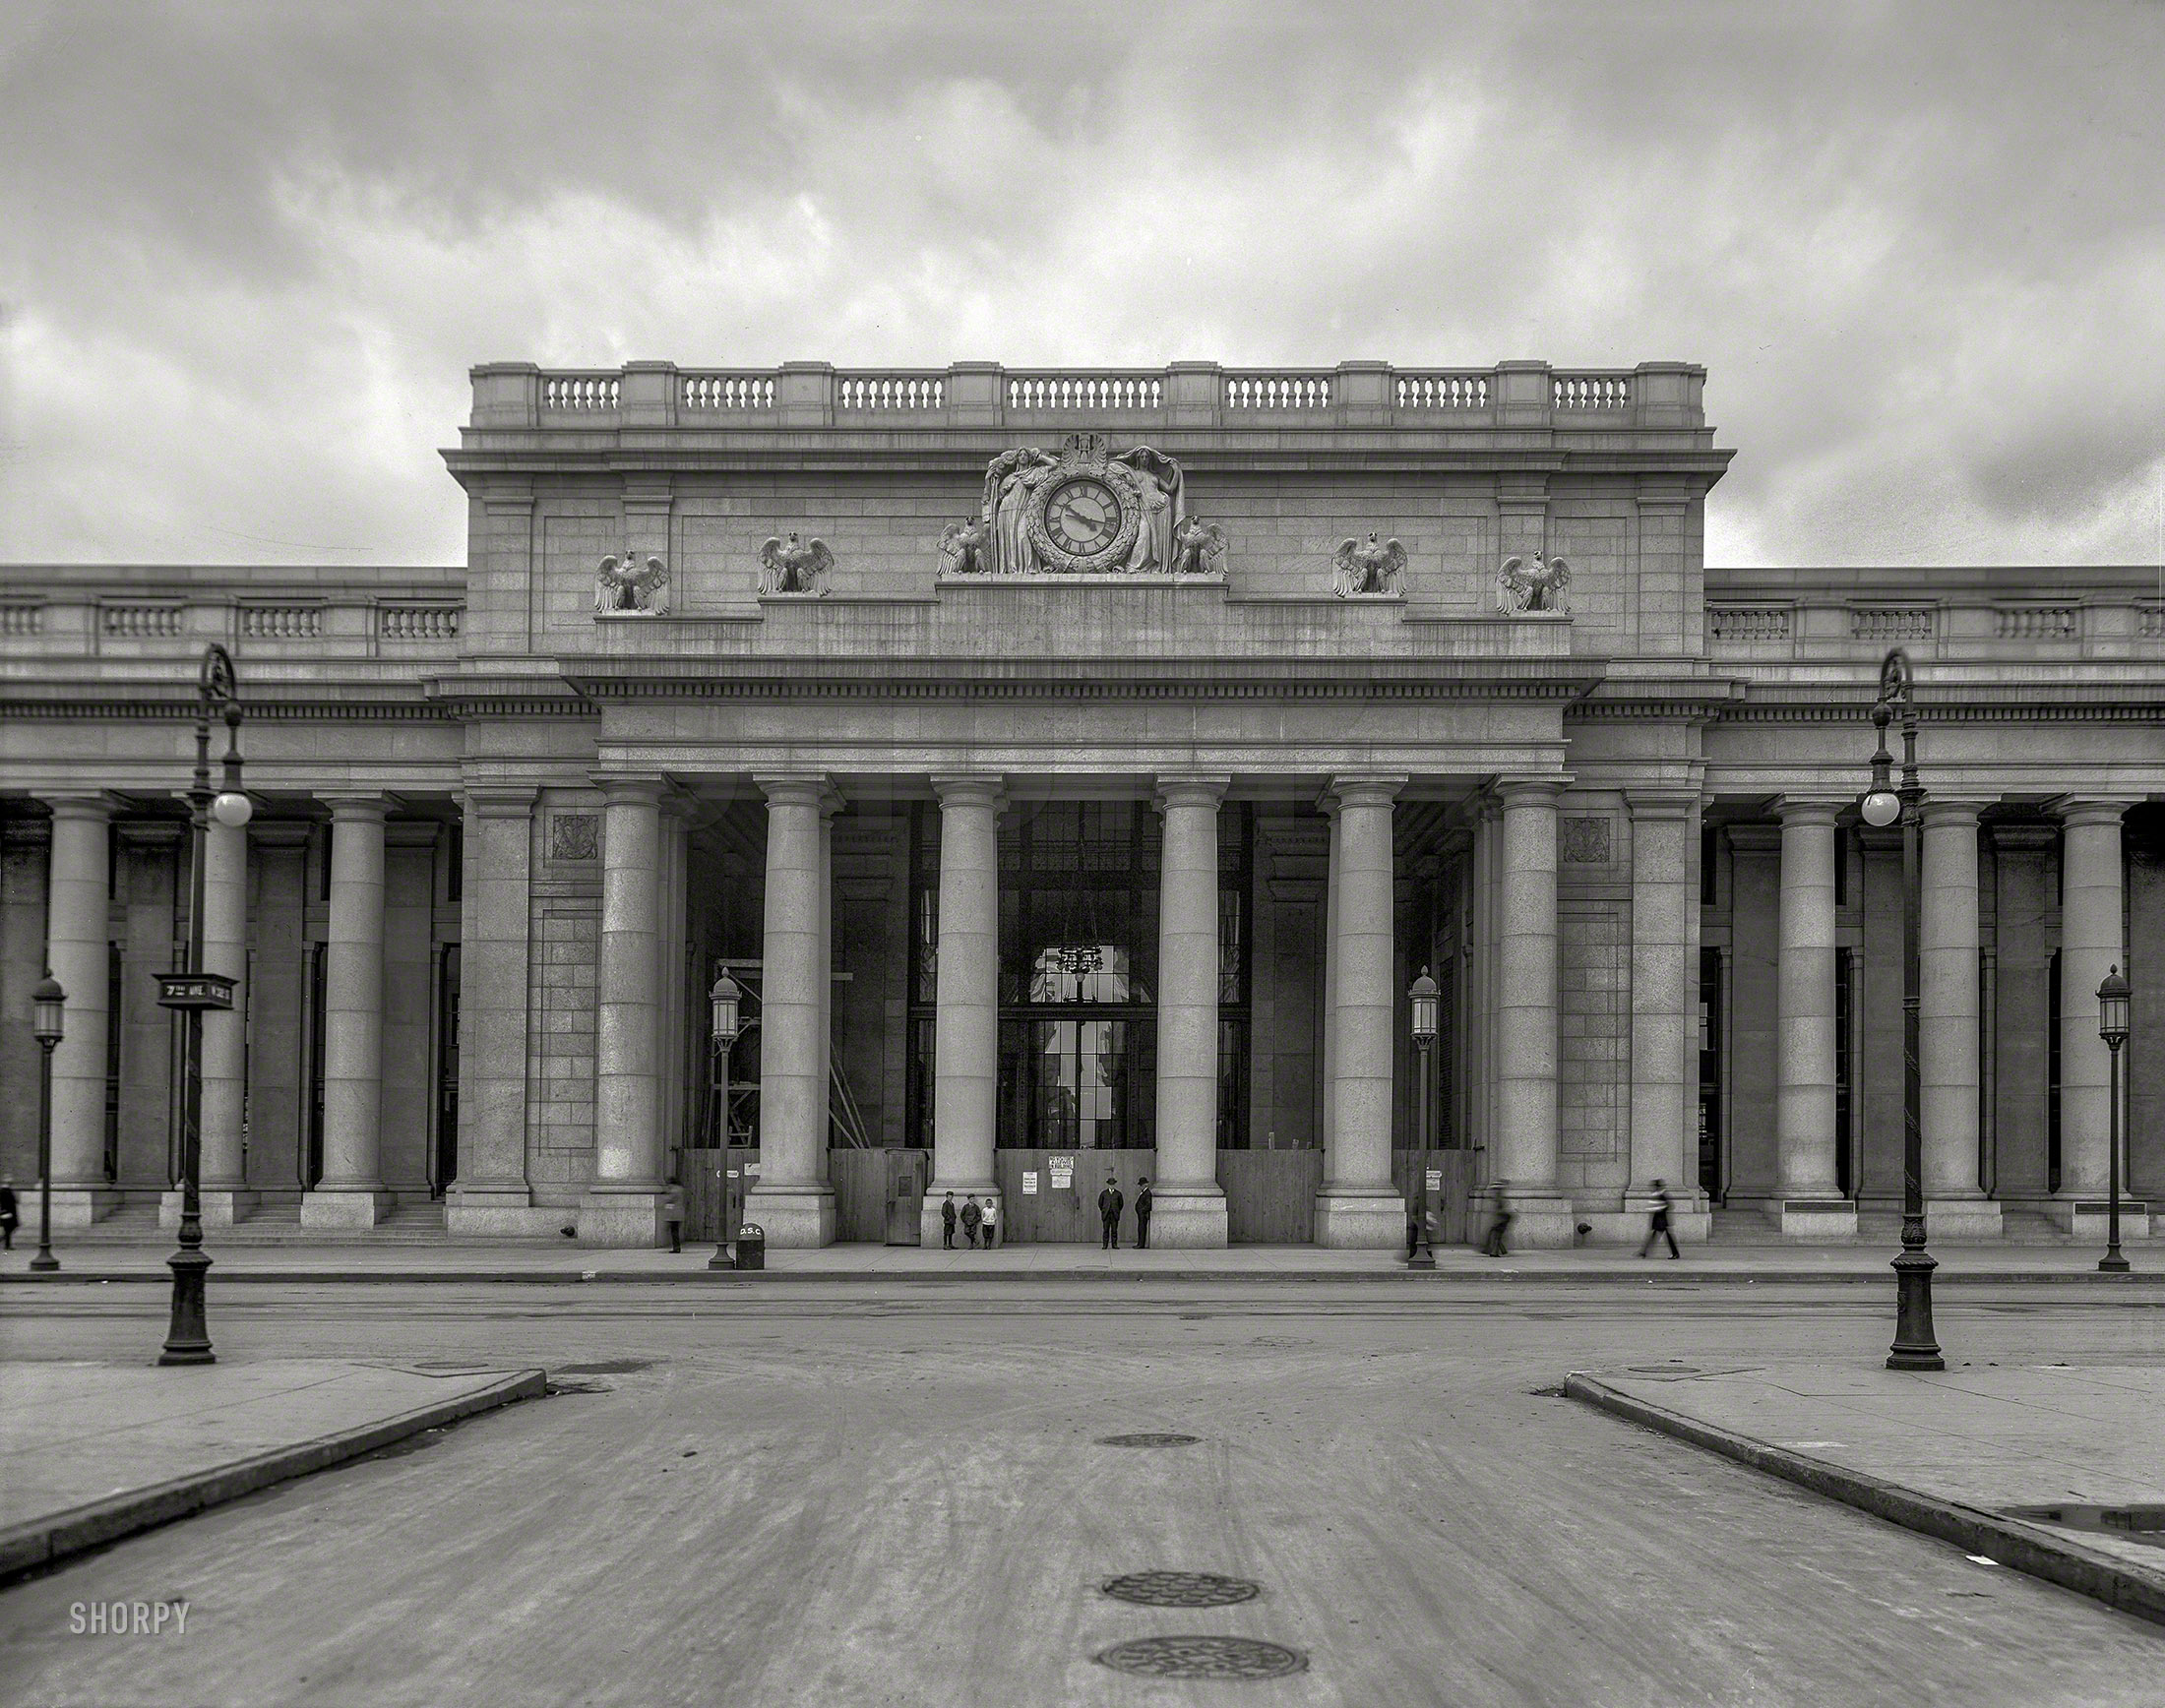 "Thirty-Second Street entrance, Pennsylvania Station, New York." The original Penn Station in the final stages of construction, circa 1910. 8x10 inch dry plate glass negative, Detroit Publishing Company. View full size.